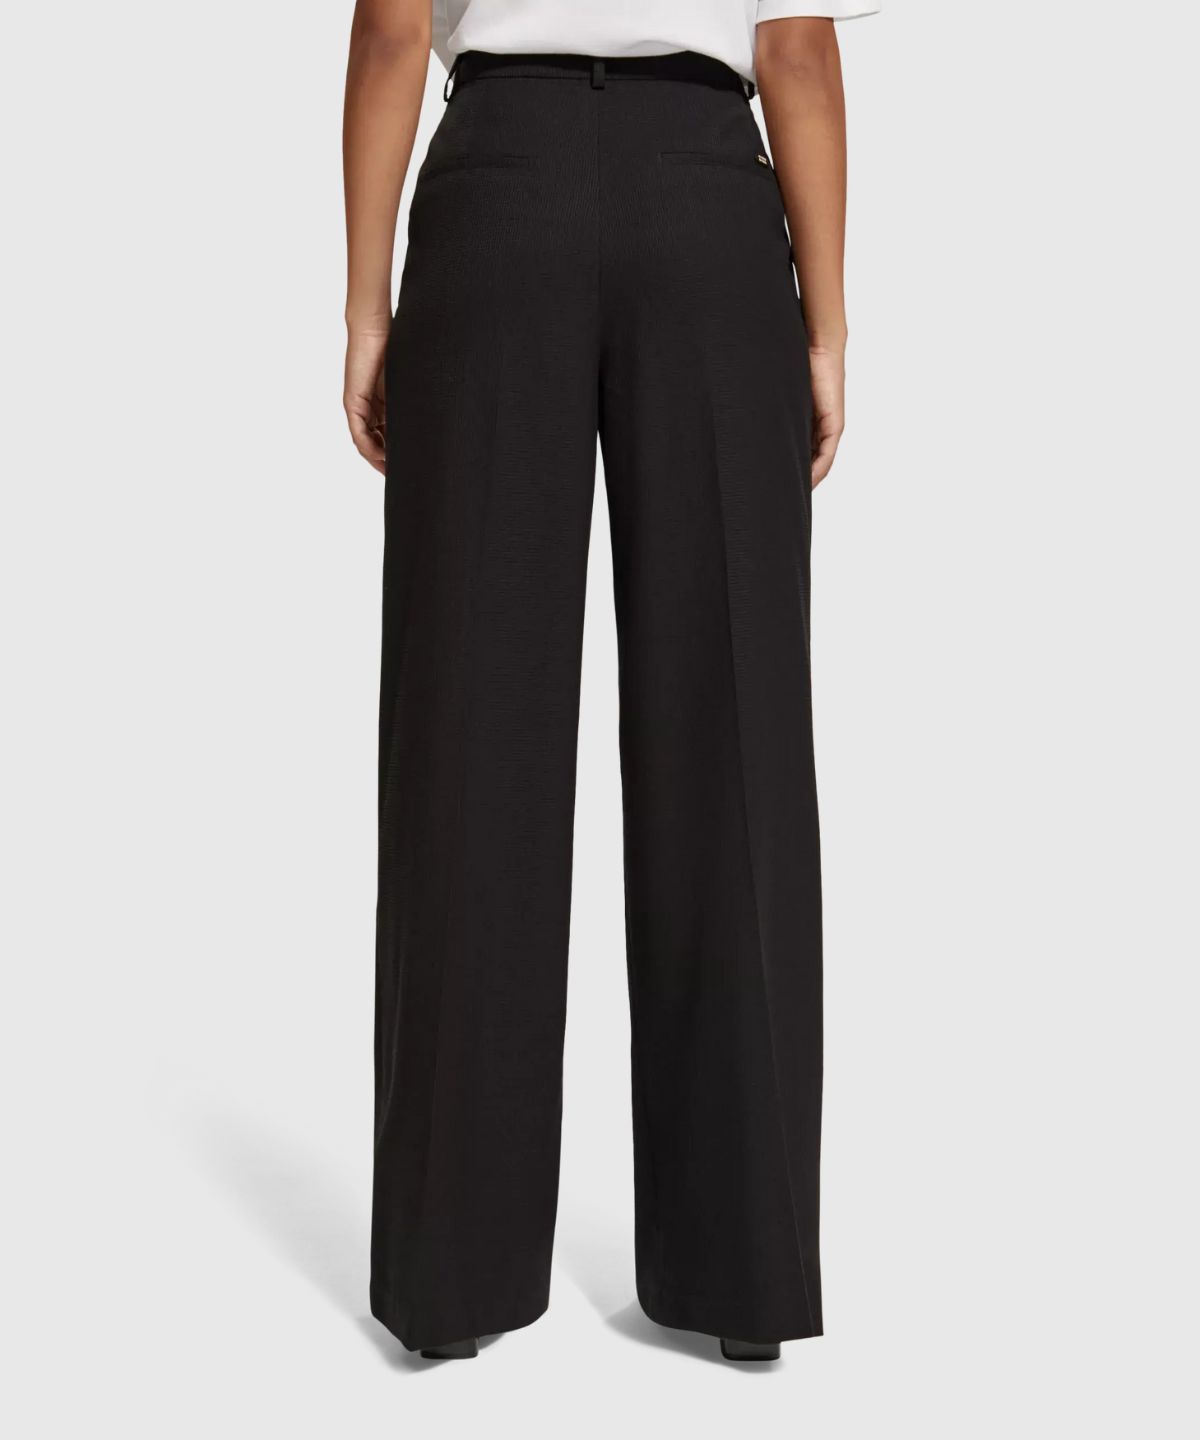 Rose – pleated high rise wide leg pant